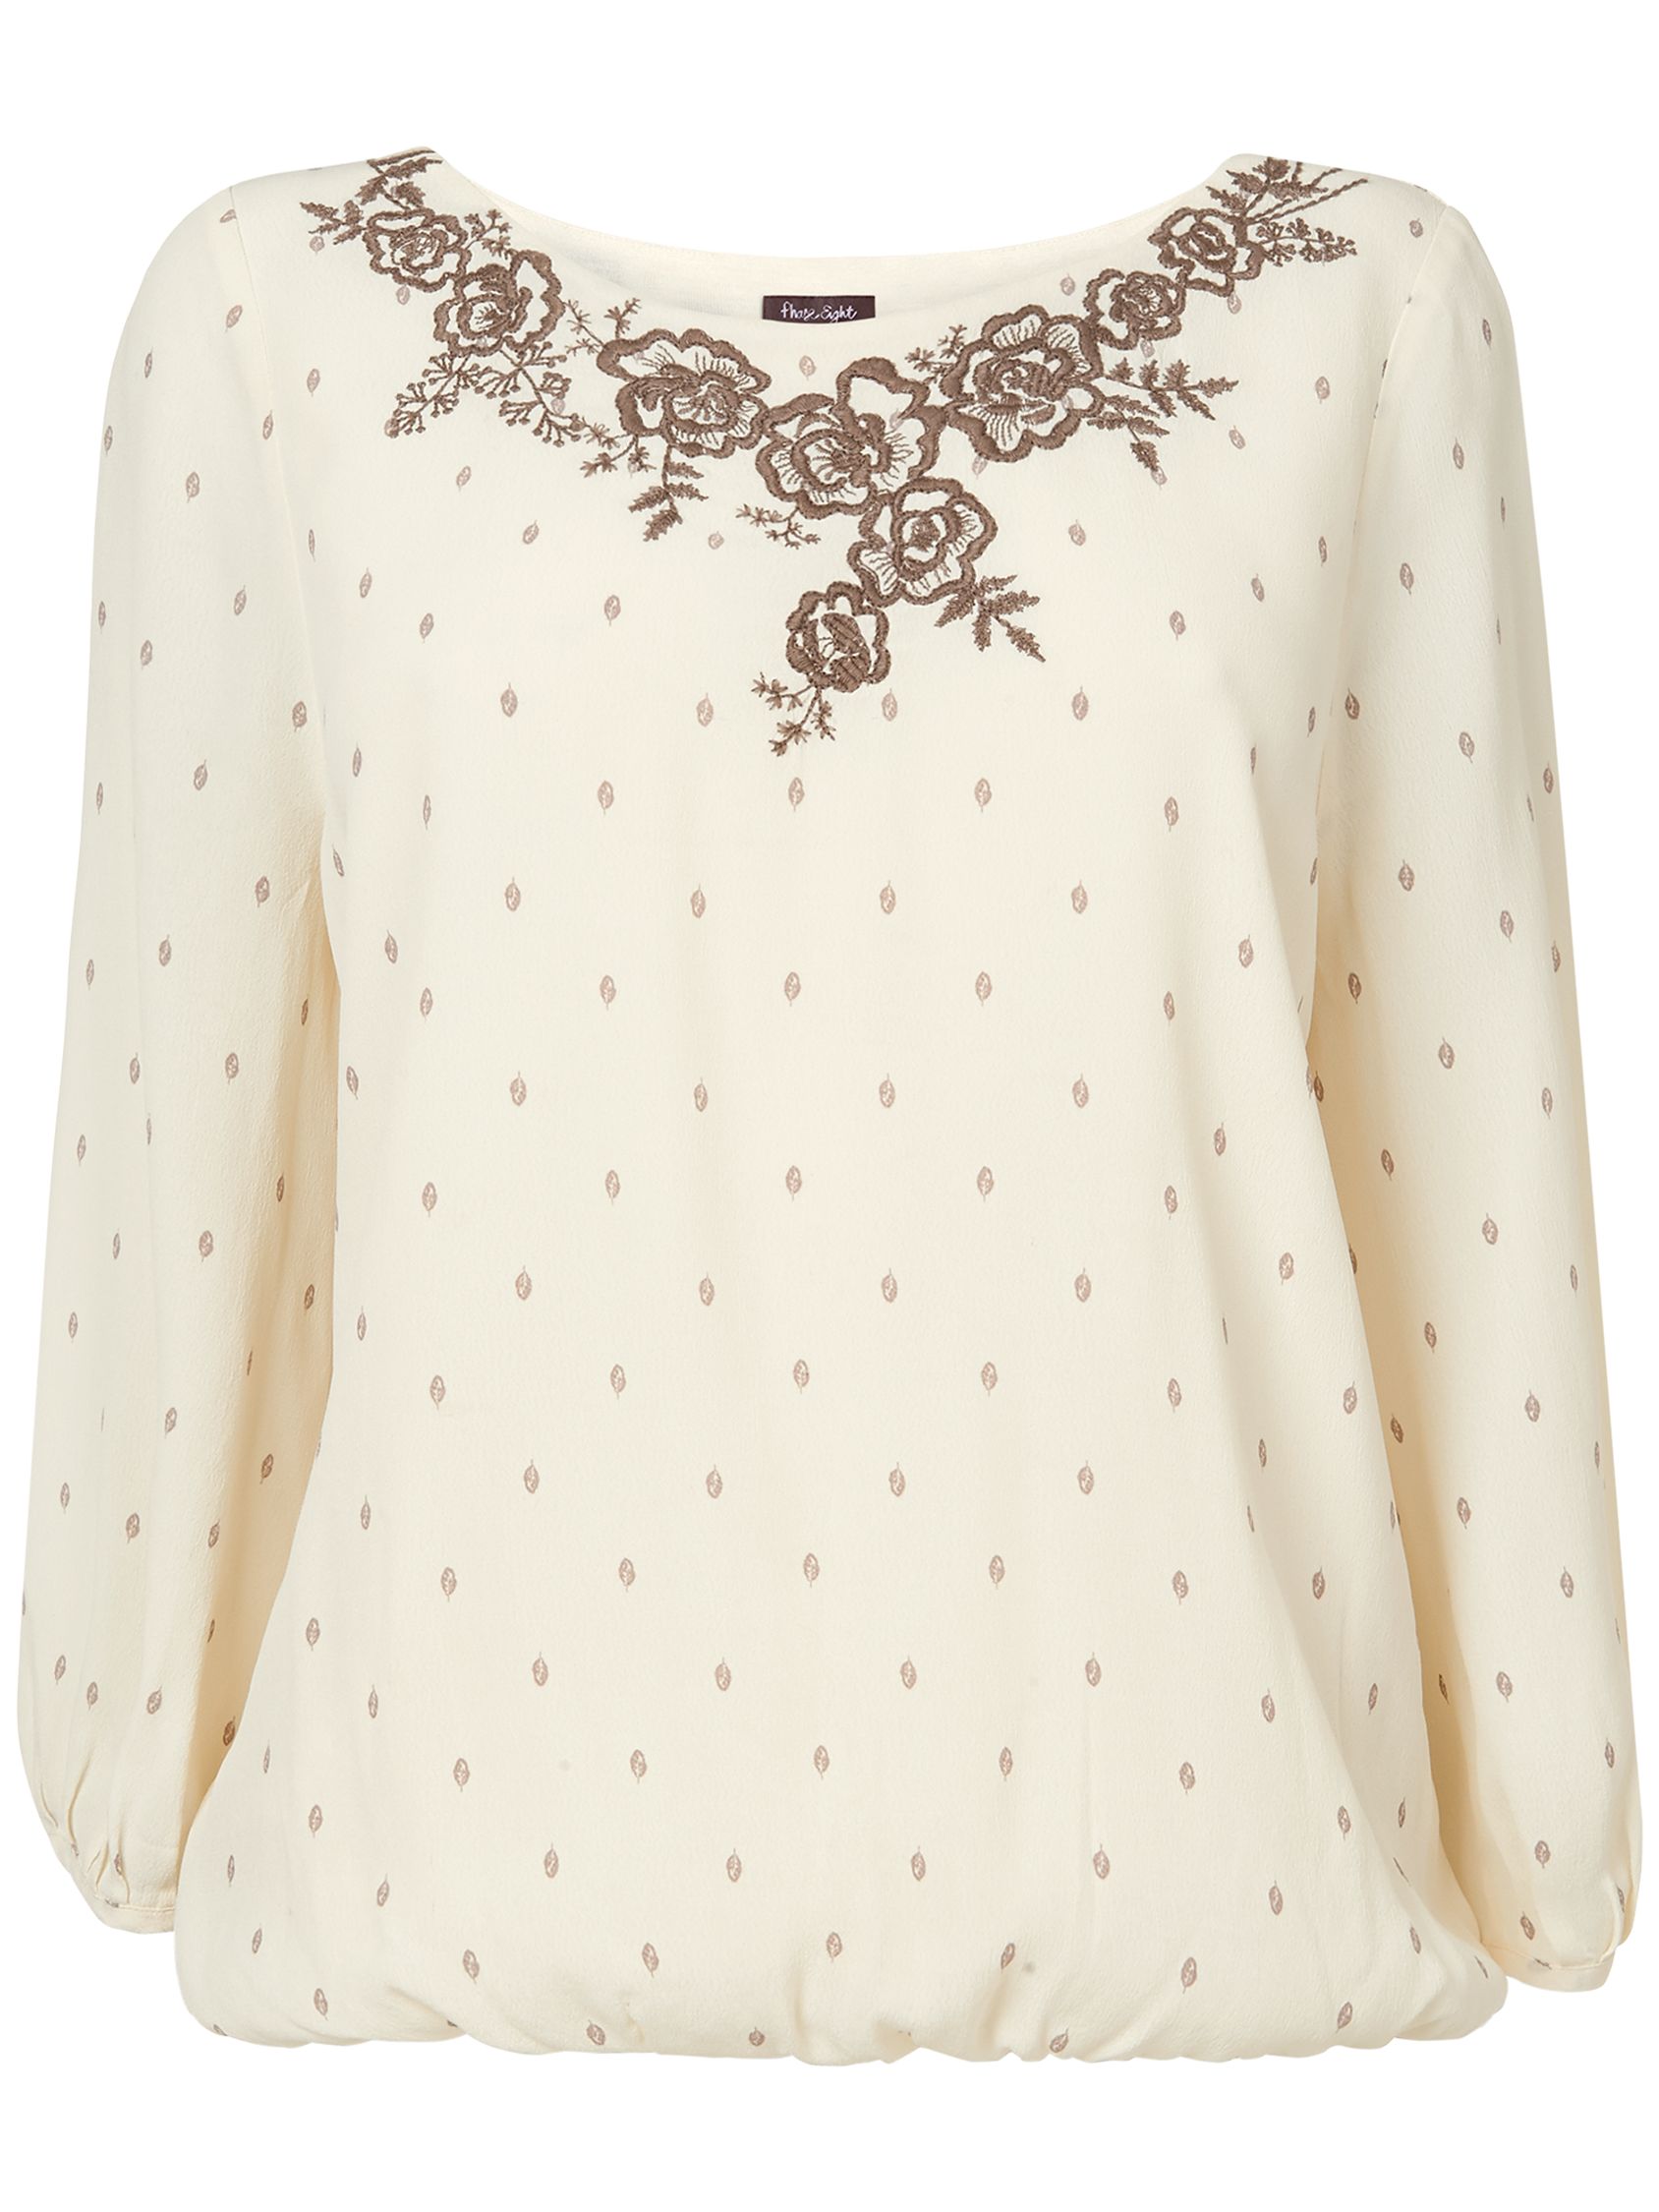 Phase Eight Ness Embroidered Blouse, Ivory at John Lewis & Partners